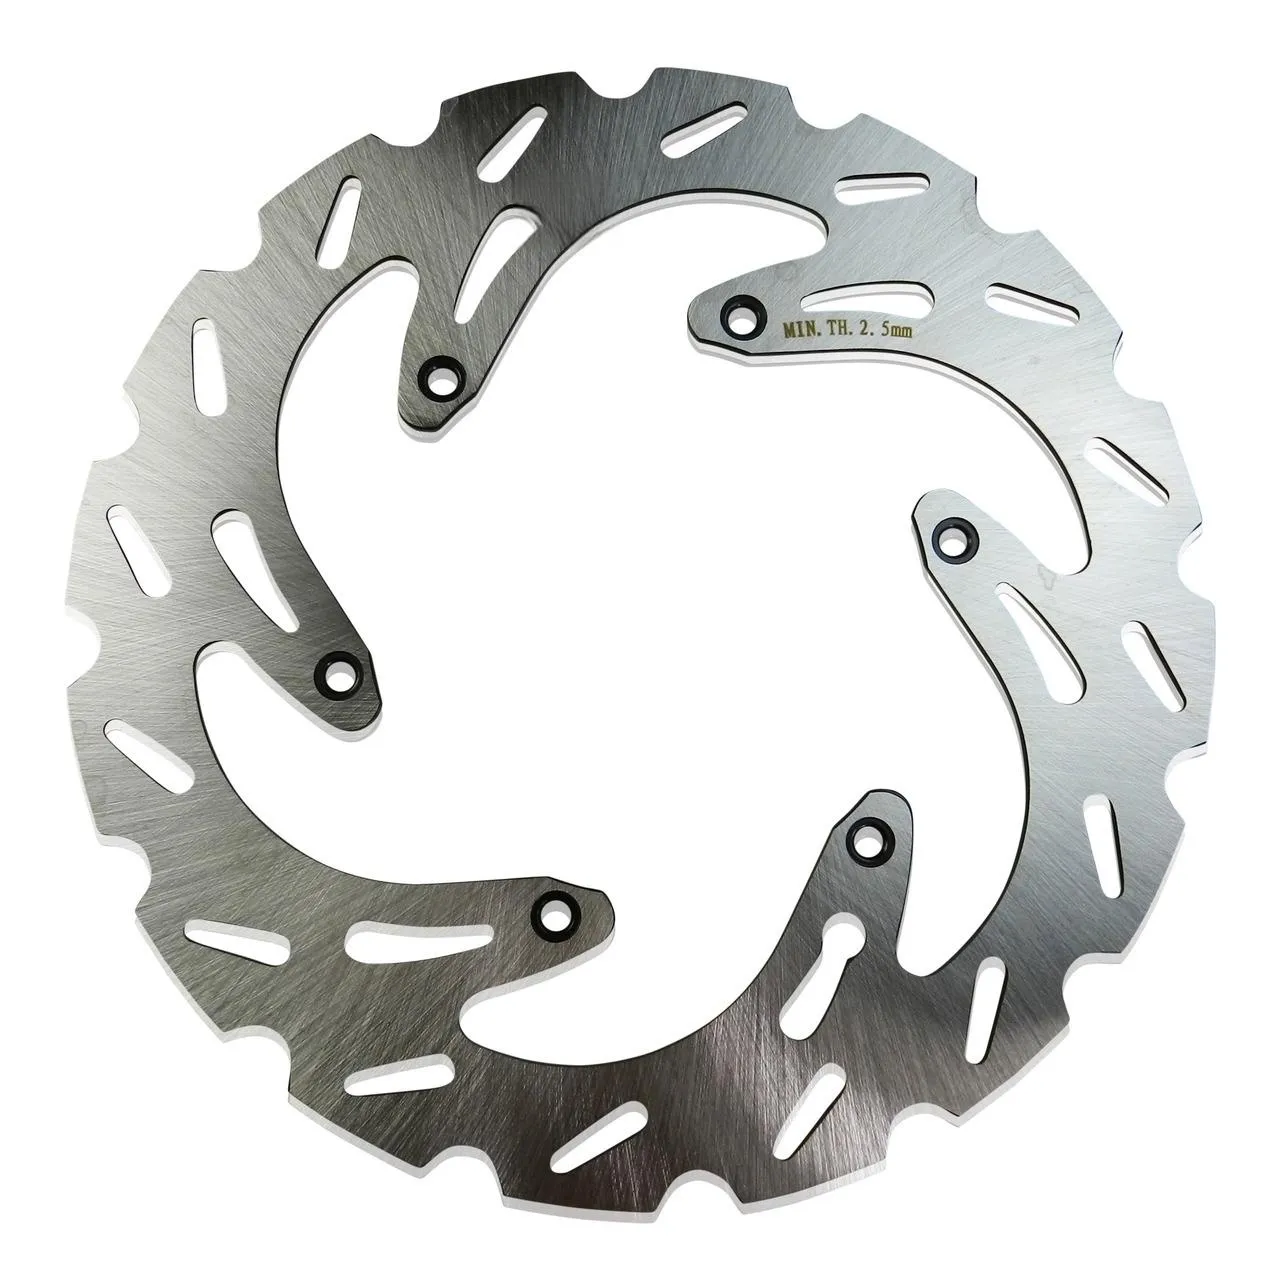 Custom Stainless Steel Dirt Bike Motorcycle 260mm Front Brake Disc Rotor for KTM SX EXC Gas Gas